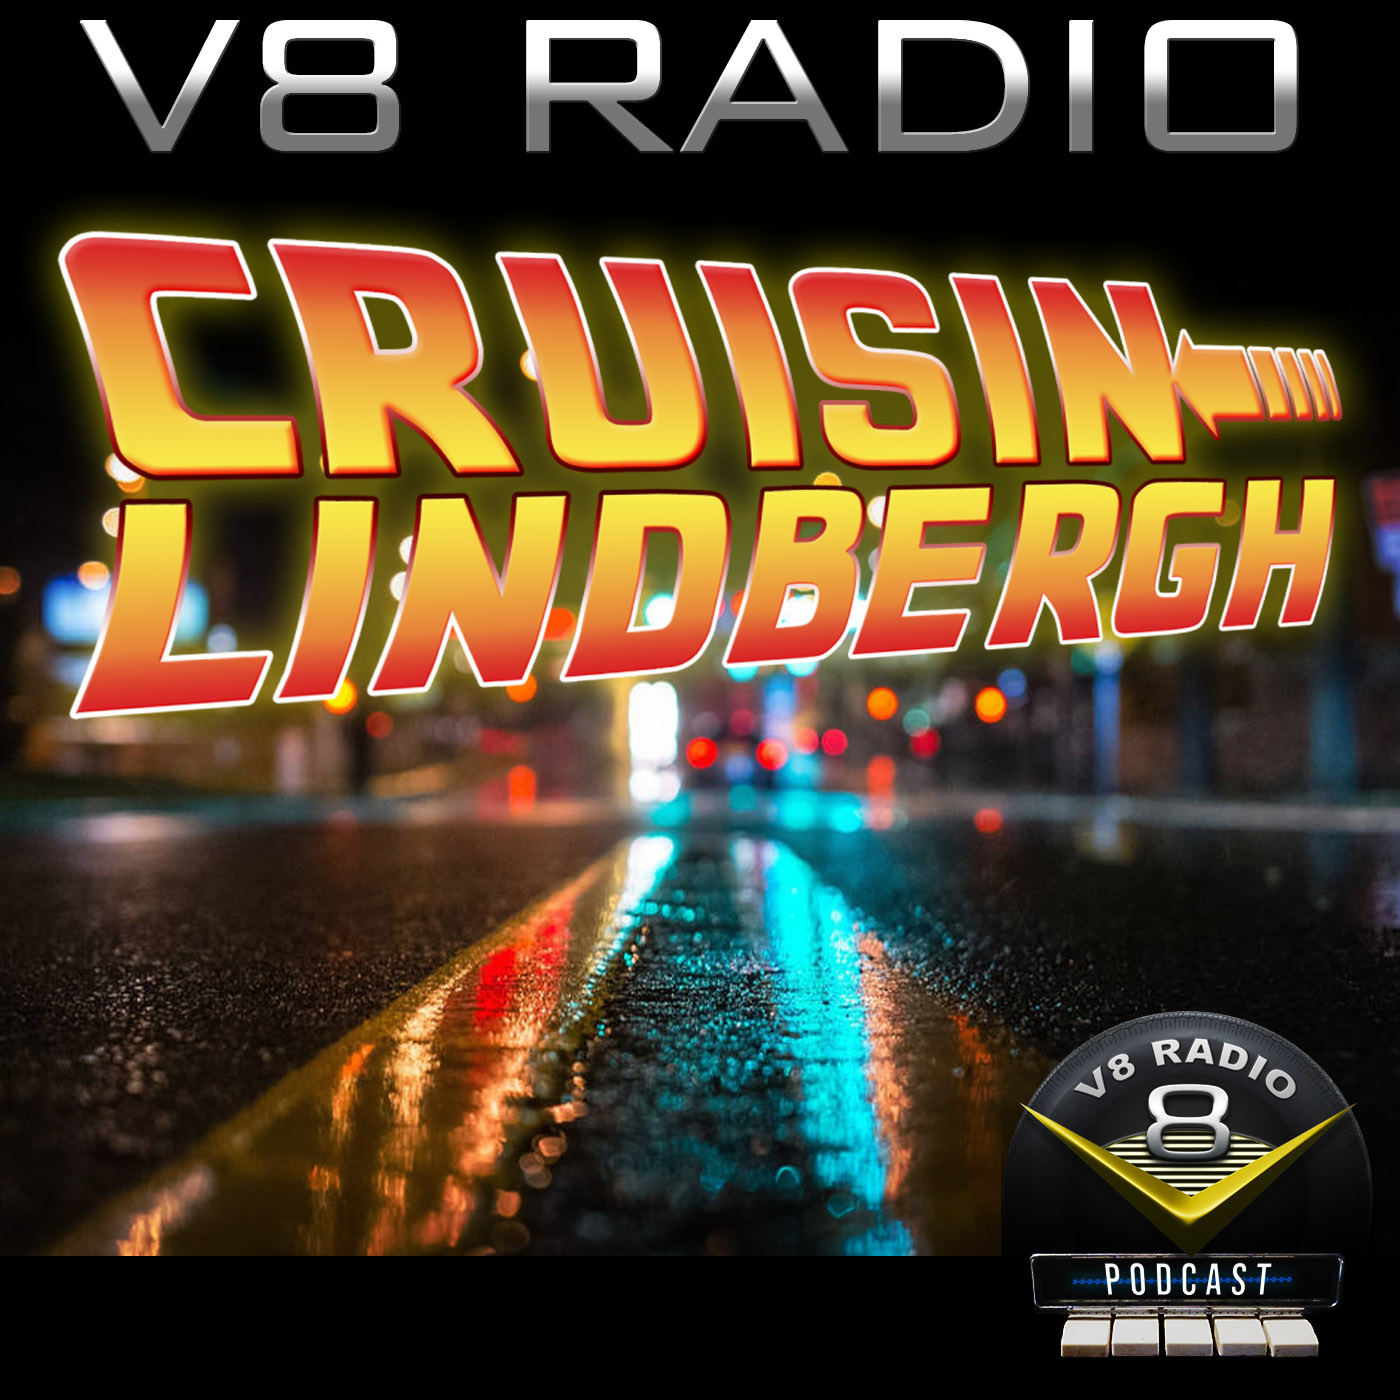 Carrying On The Cruisin' Tradition with Guest Jason LiCavoli and the Cruisin' Lindbergh Event, Trivia, and More on the V8 Radio Podcast!